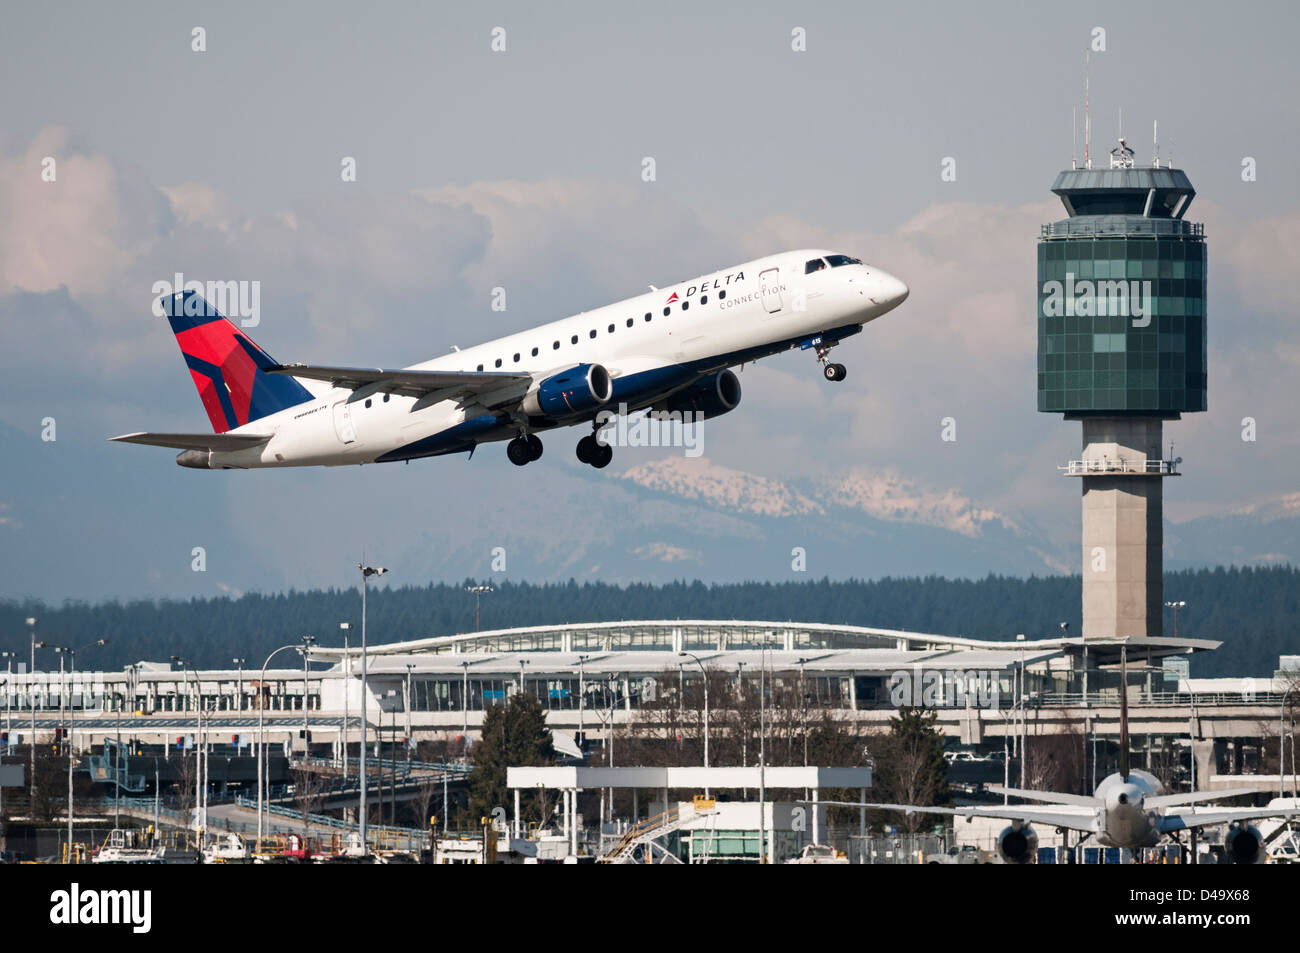 Delta Connection Airlines Embraer ERJ-175 regional jet airliner departs from Vancouver International Airport N615CZ Stock Photo